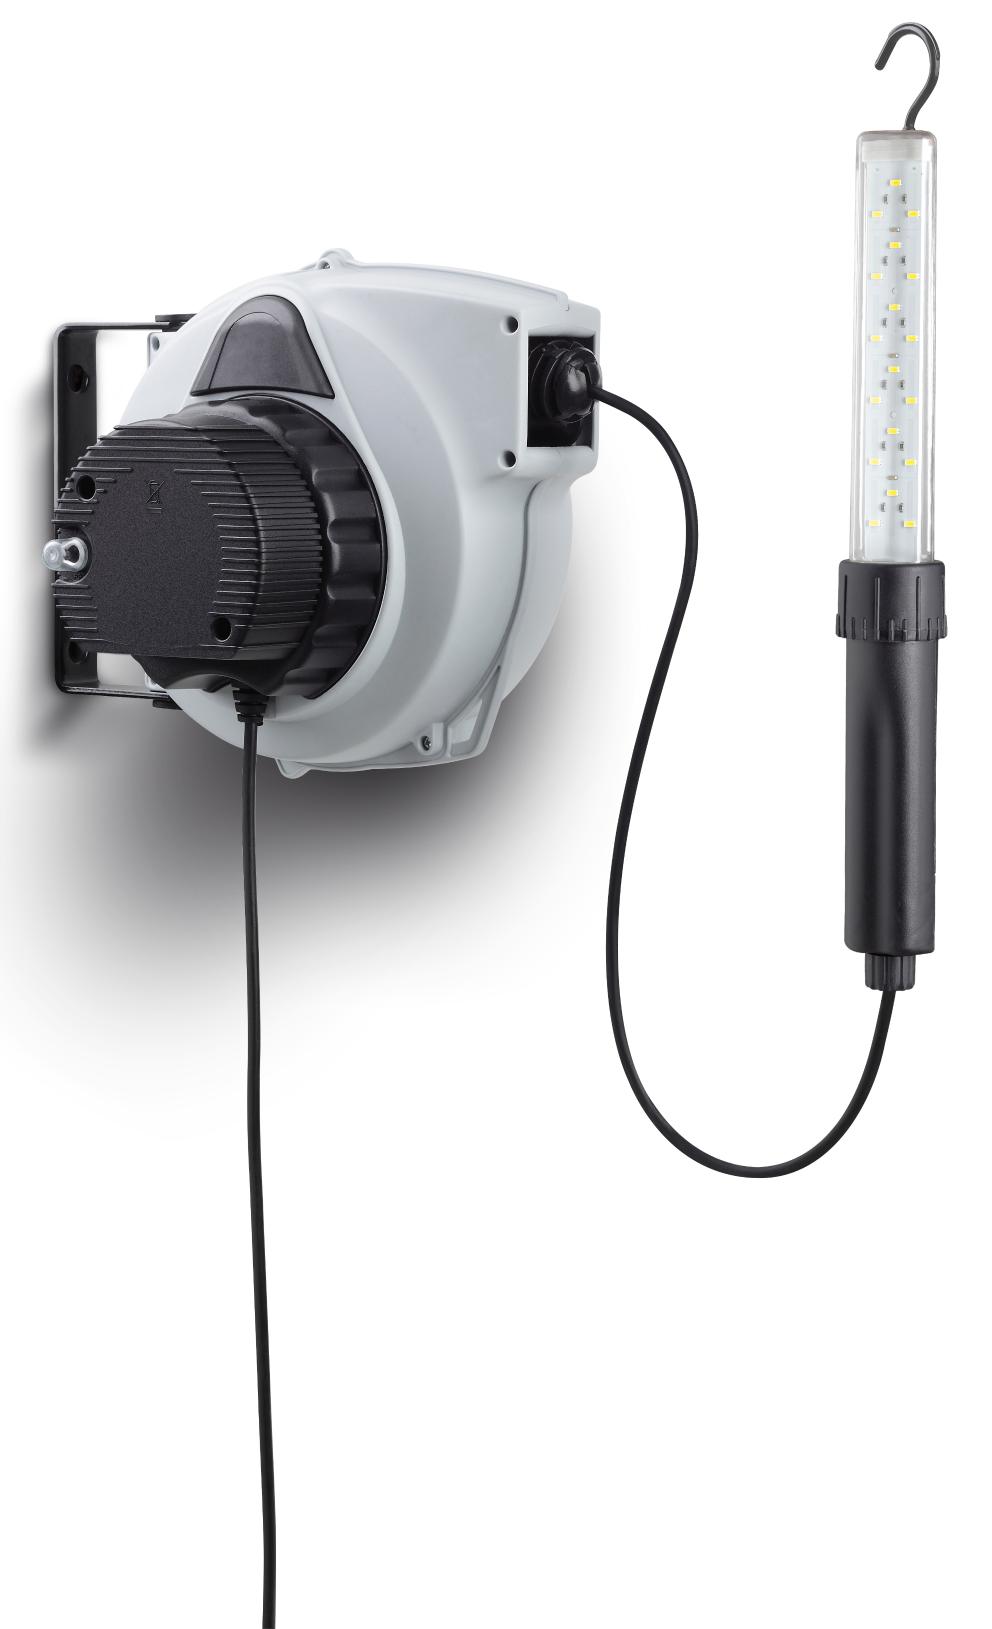 CABLE REEL WITH 230 V AC TO 24 V DC TRANSFORMER AND LED LAMP, RM-POWER SERIES, 230 V, 50 HZ, 15 M